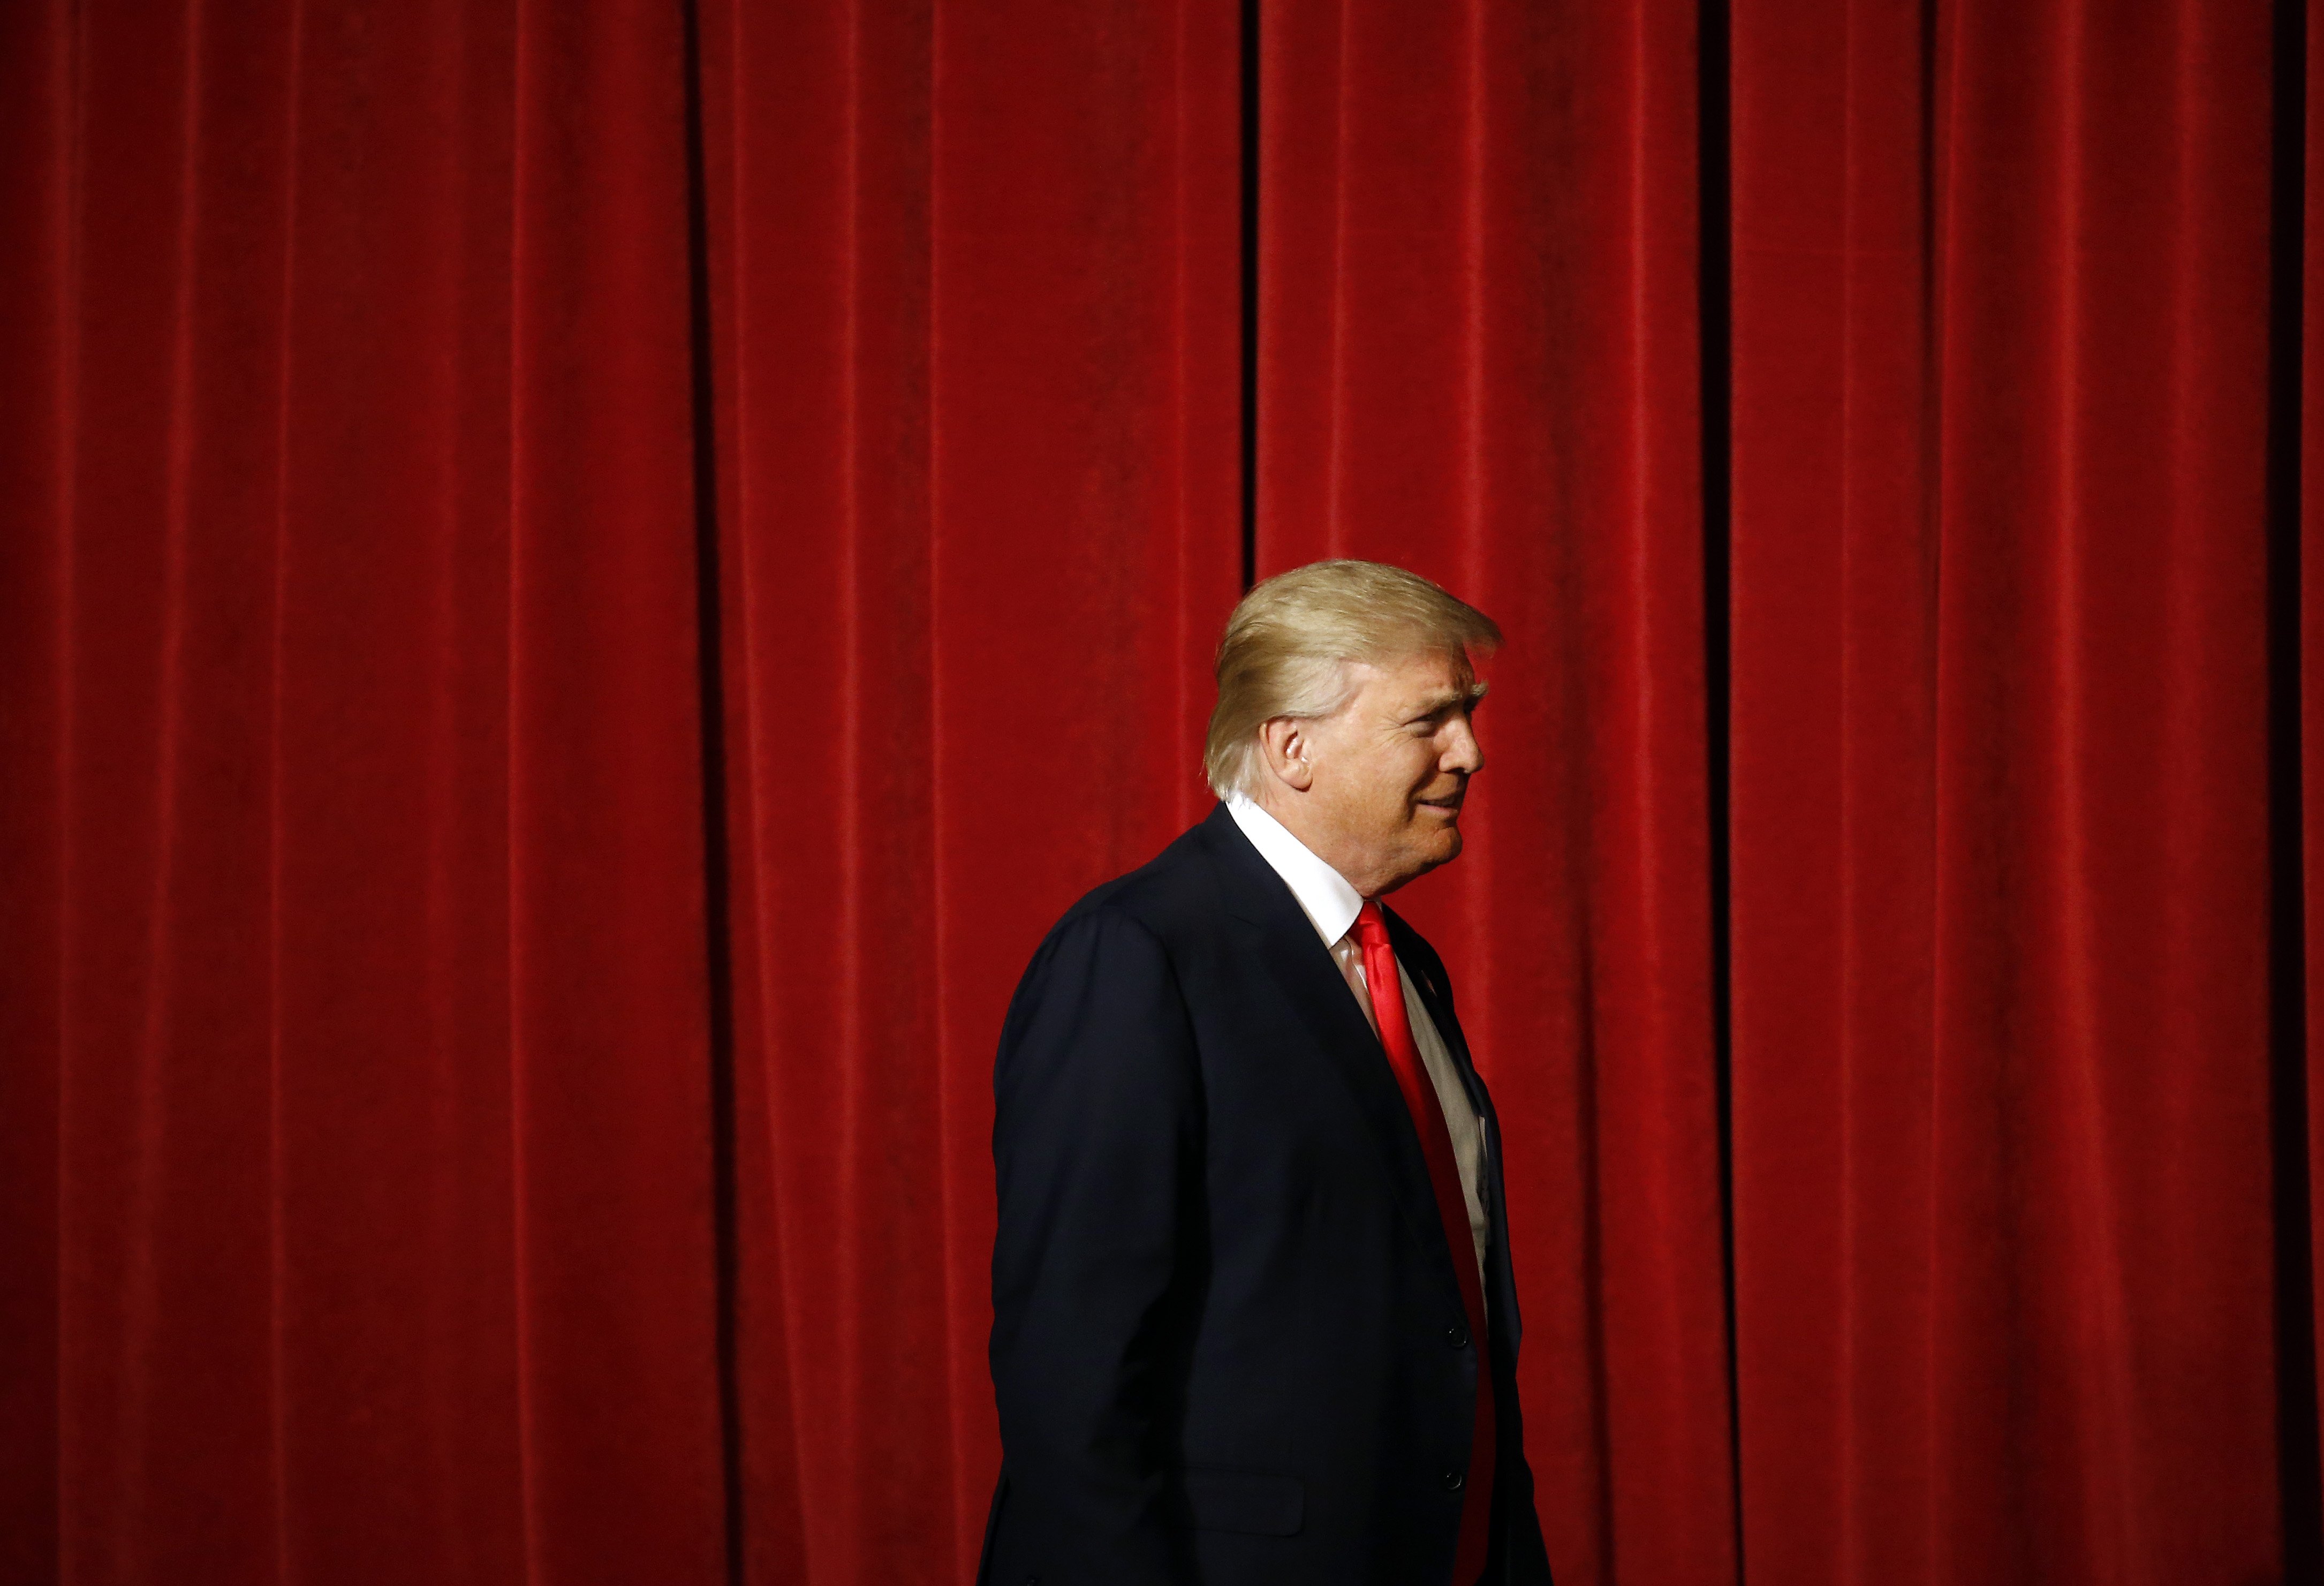 Donald Trump walks onstage for a rally at the Surf Ballroom in Clear Lake, IO on Jan. 9, 2016. (Patrick Semansky—AP)